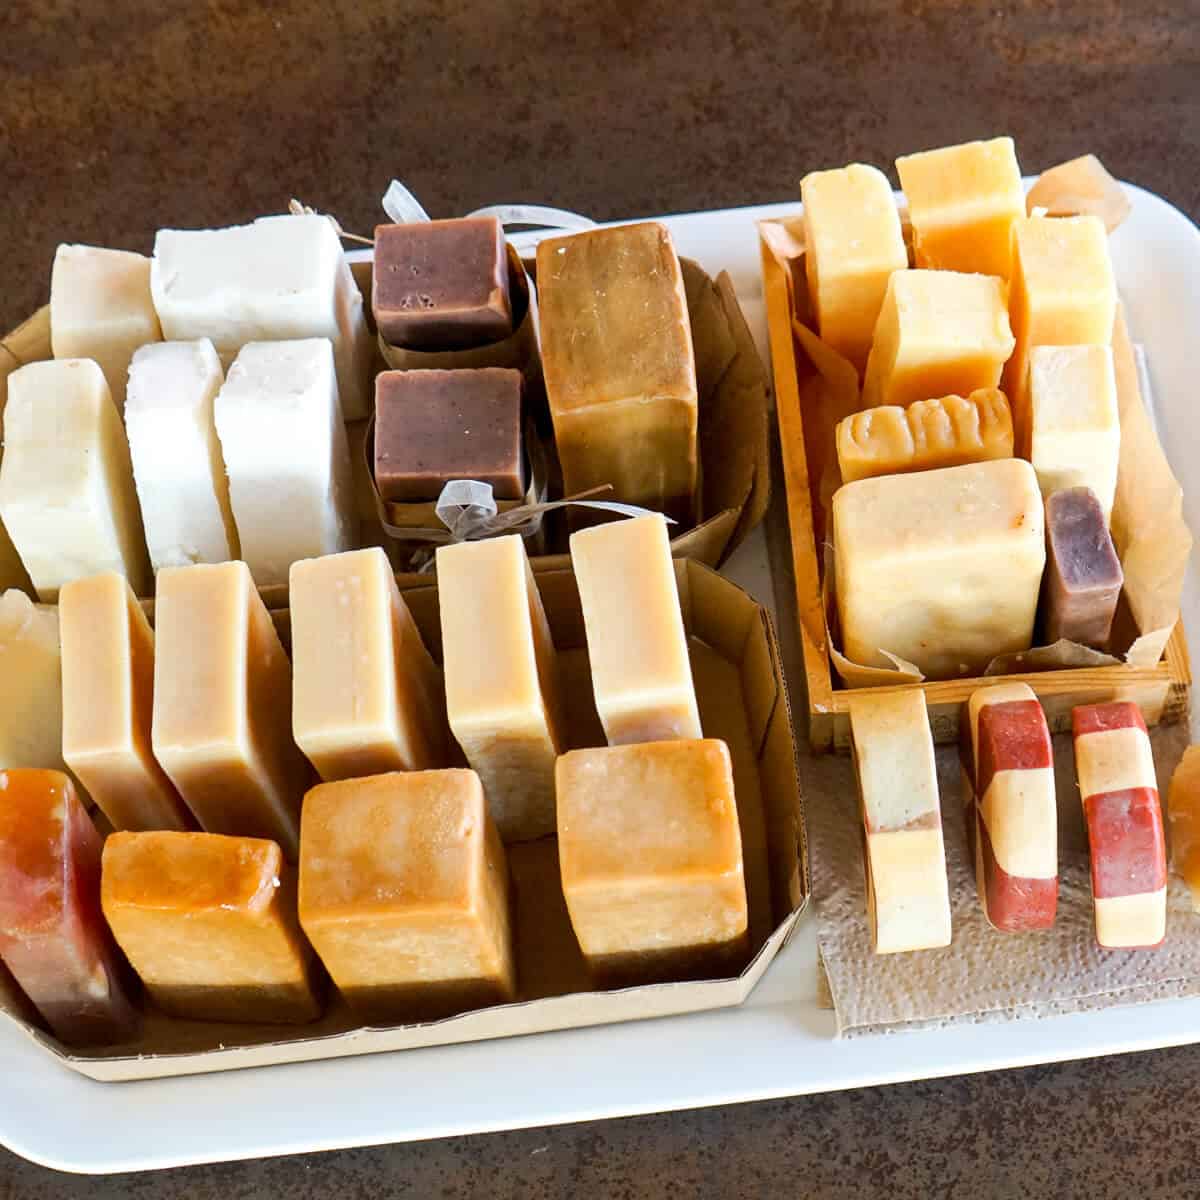 Overhead view of many groups of soaps curing on a tray